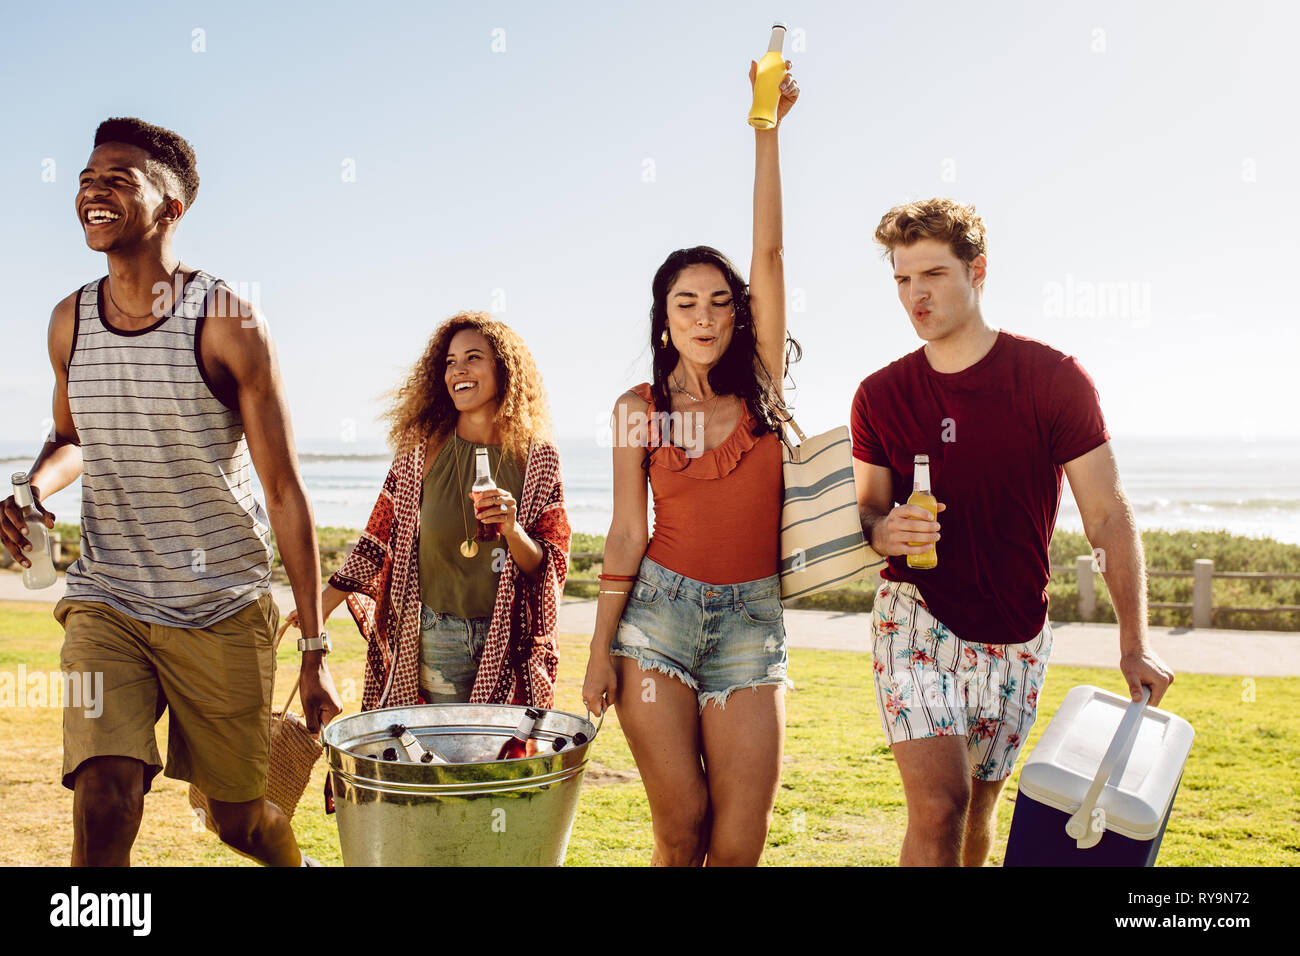 Friends carrying cooler and beverage tub for a picnic on beach. Multi-ethnic group of young people walking outdoors with drinks. Stock Photo